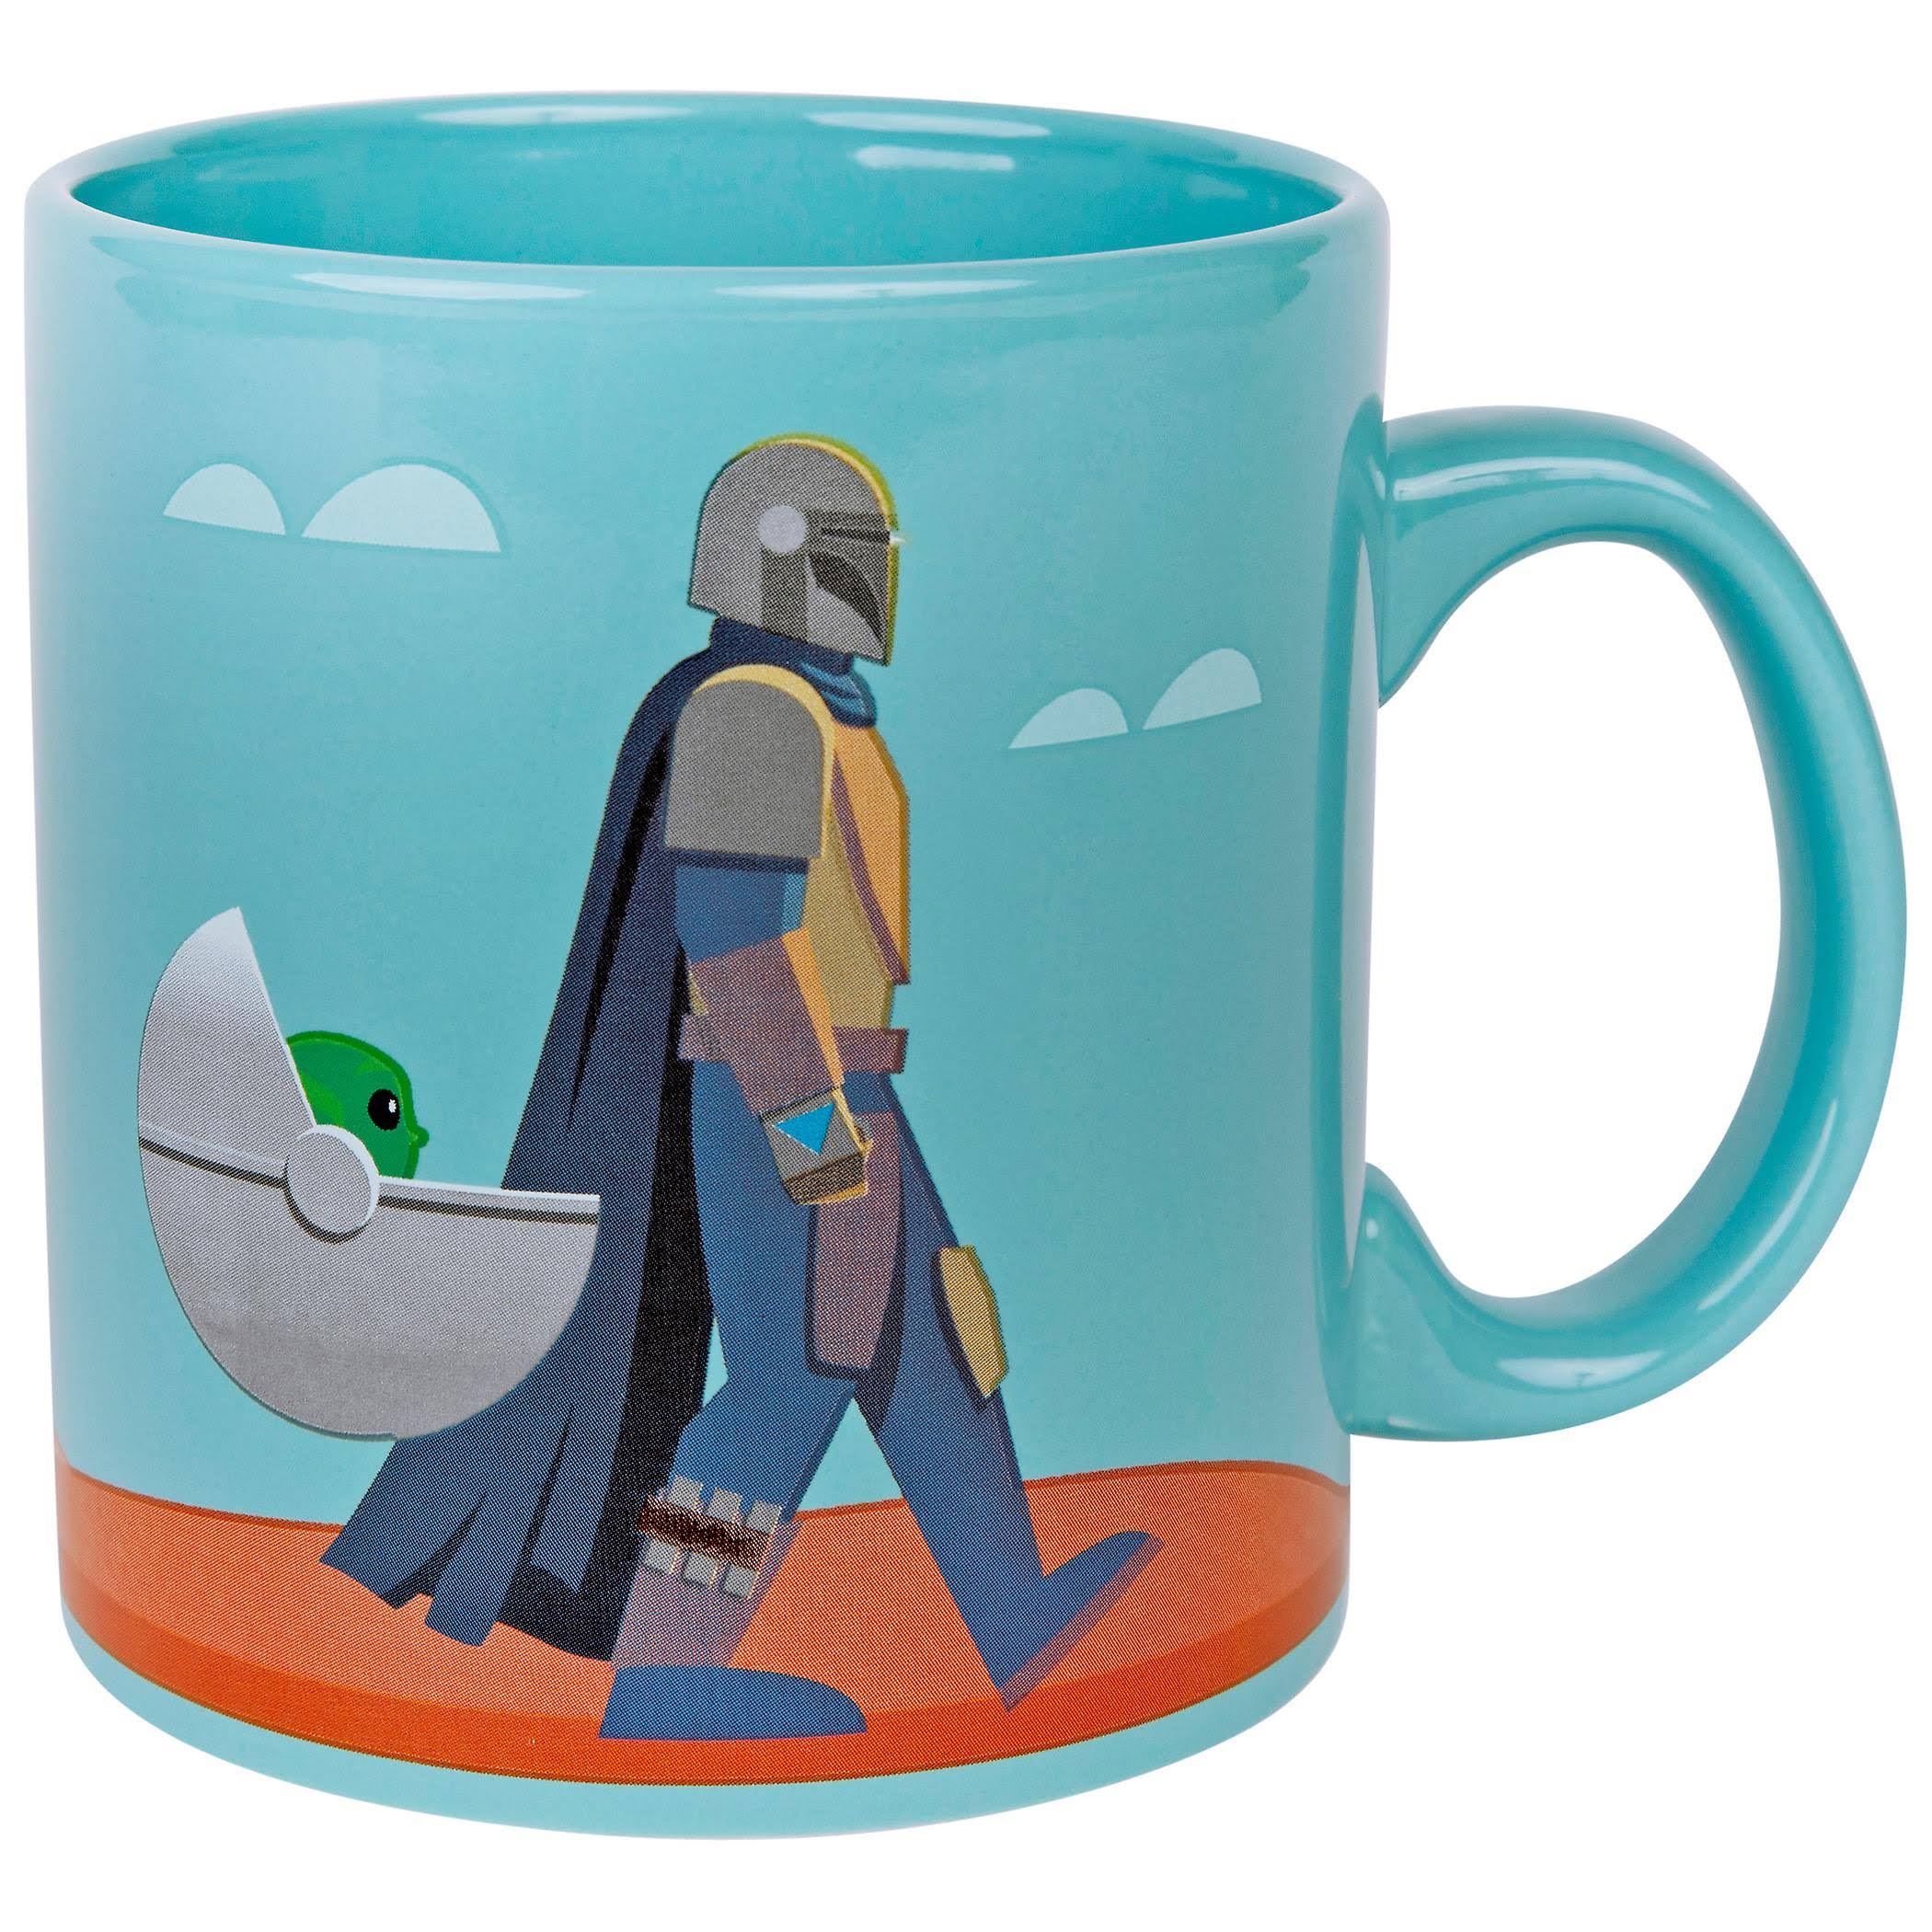 Star Wars The Mandalorian The Force Is Strong Mug